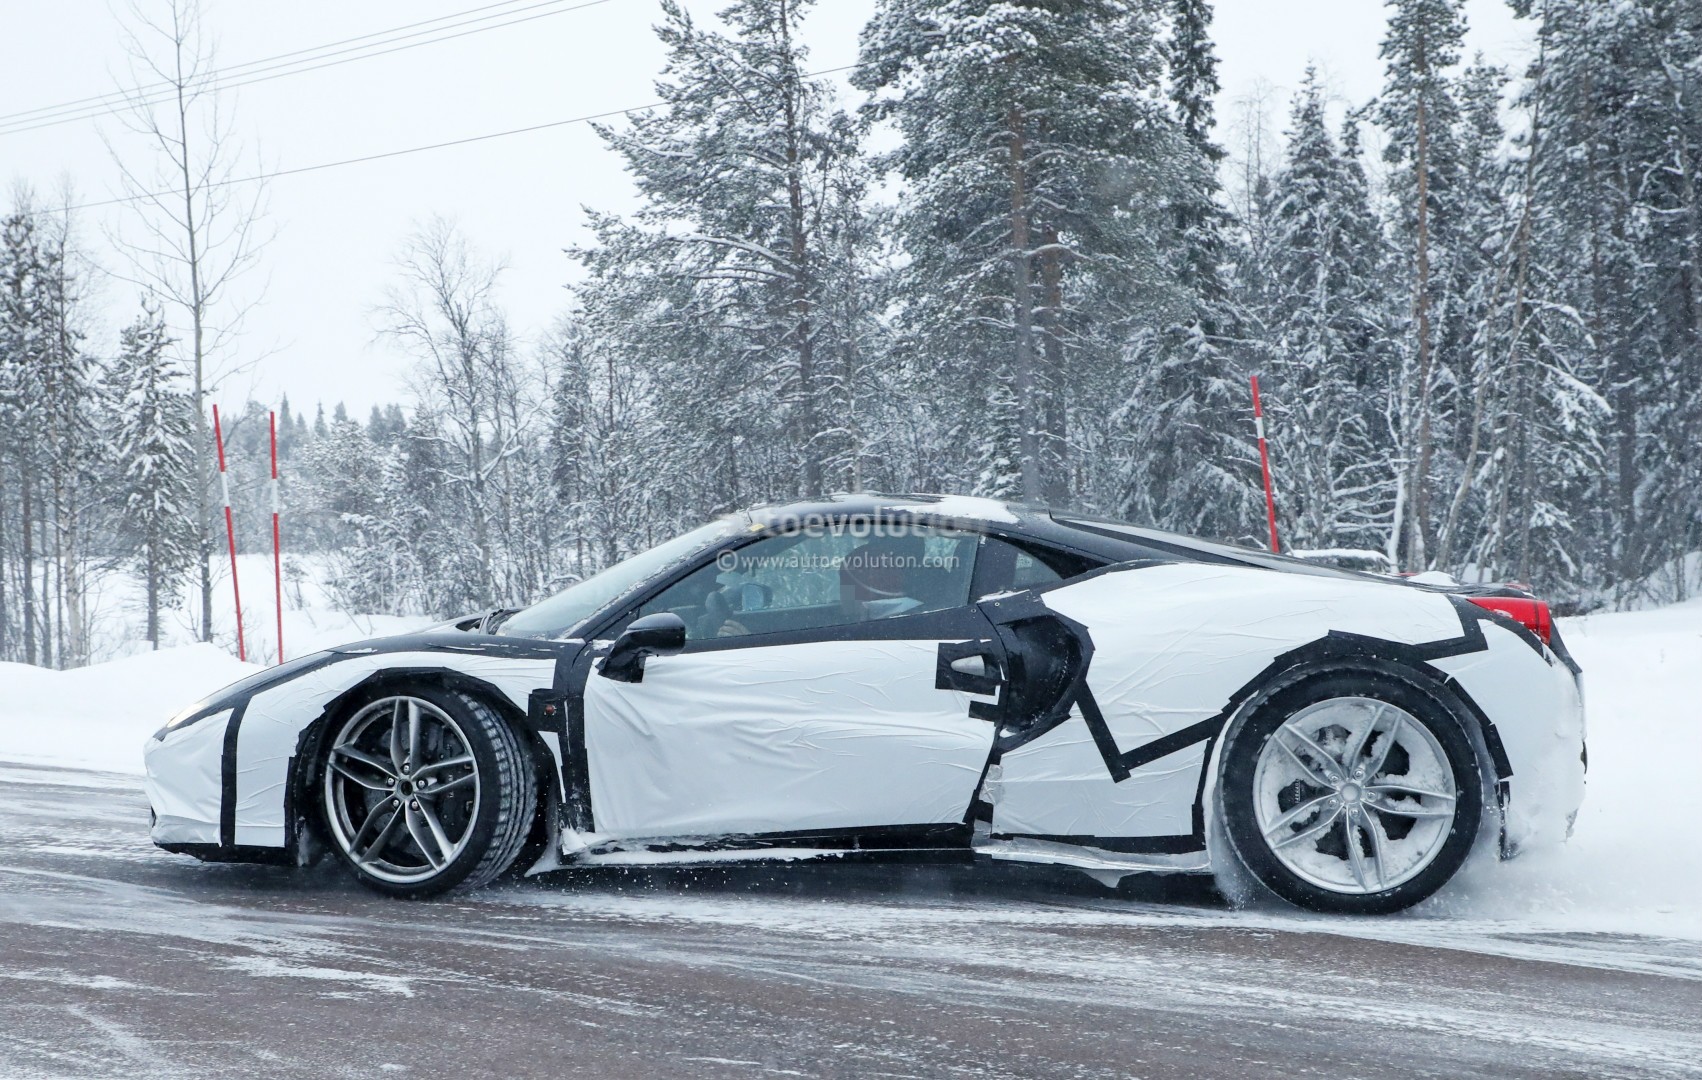 2019 - [Ferrari] Roma [F169] - Page 2 New-ferrari-dino-spied-testing-in-sweden-as-458-test-mule-with-v6-soundtrack_5